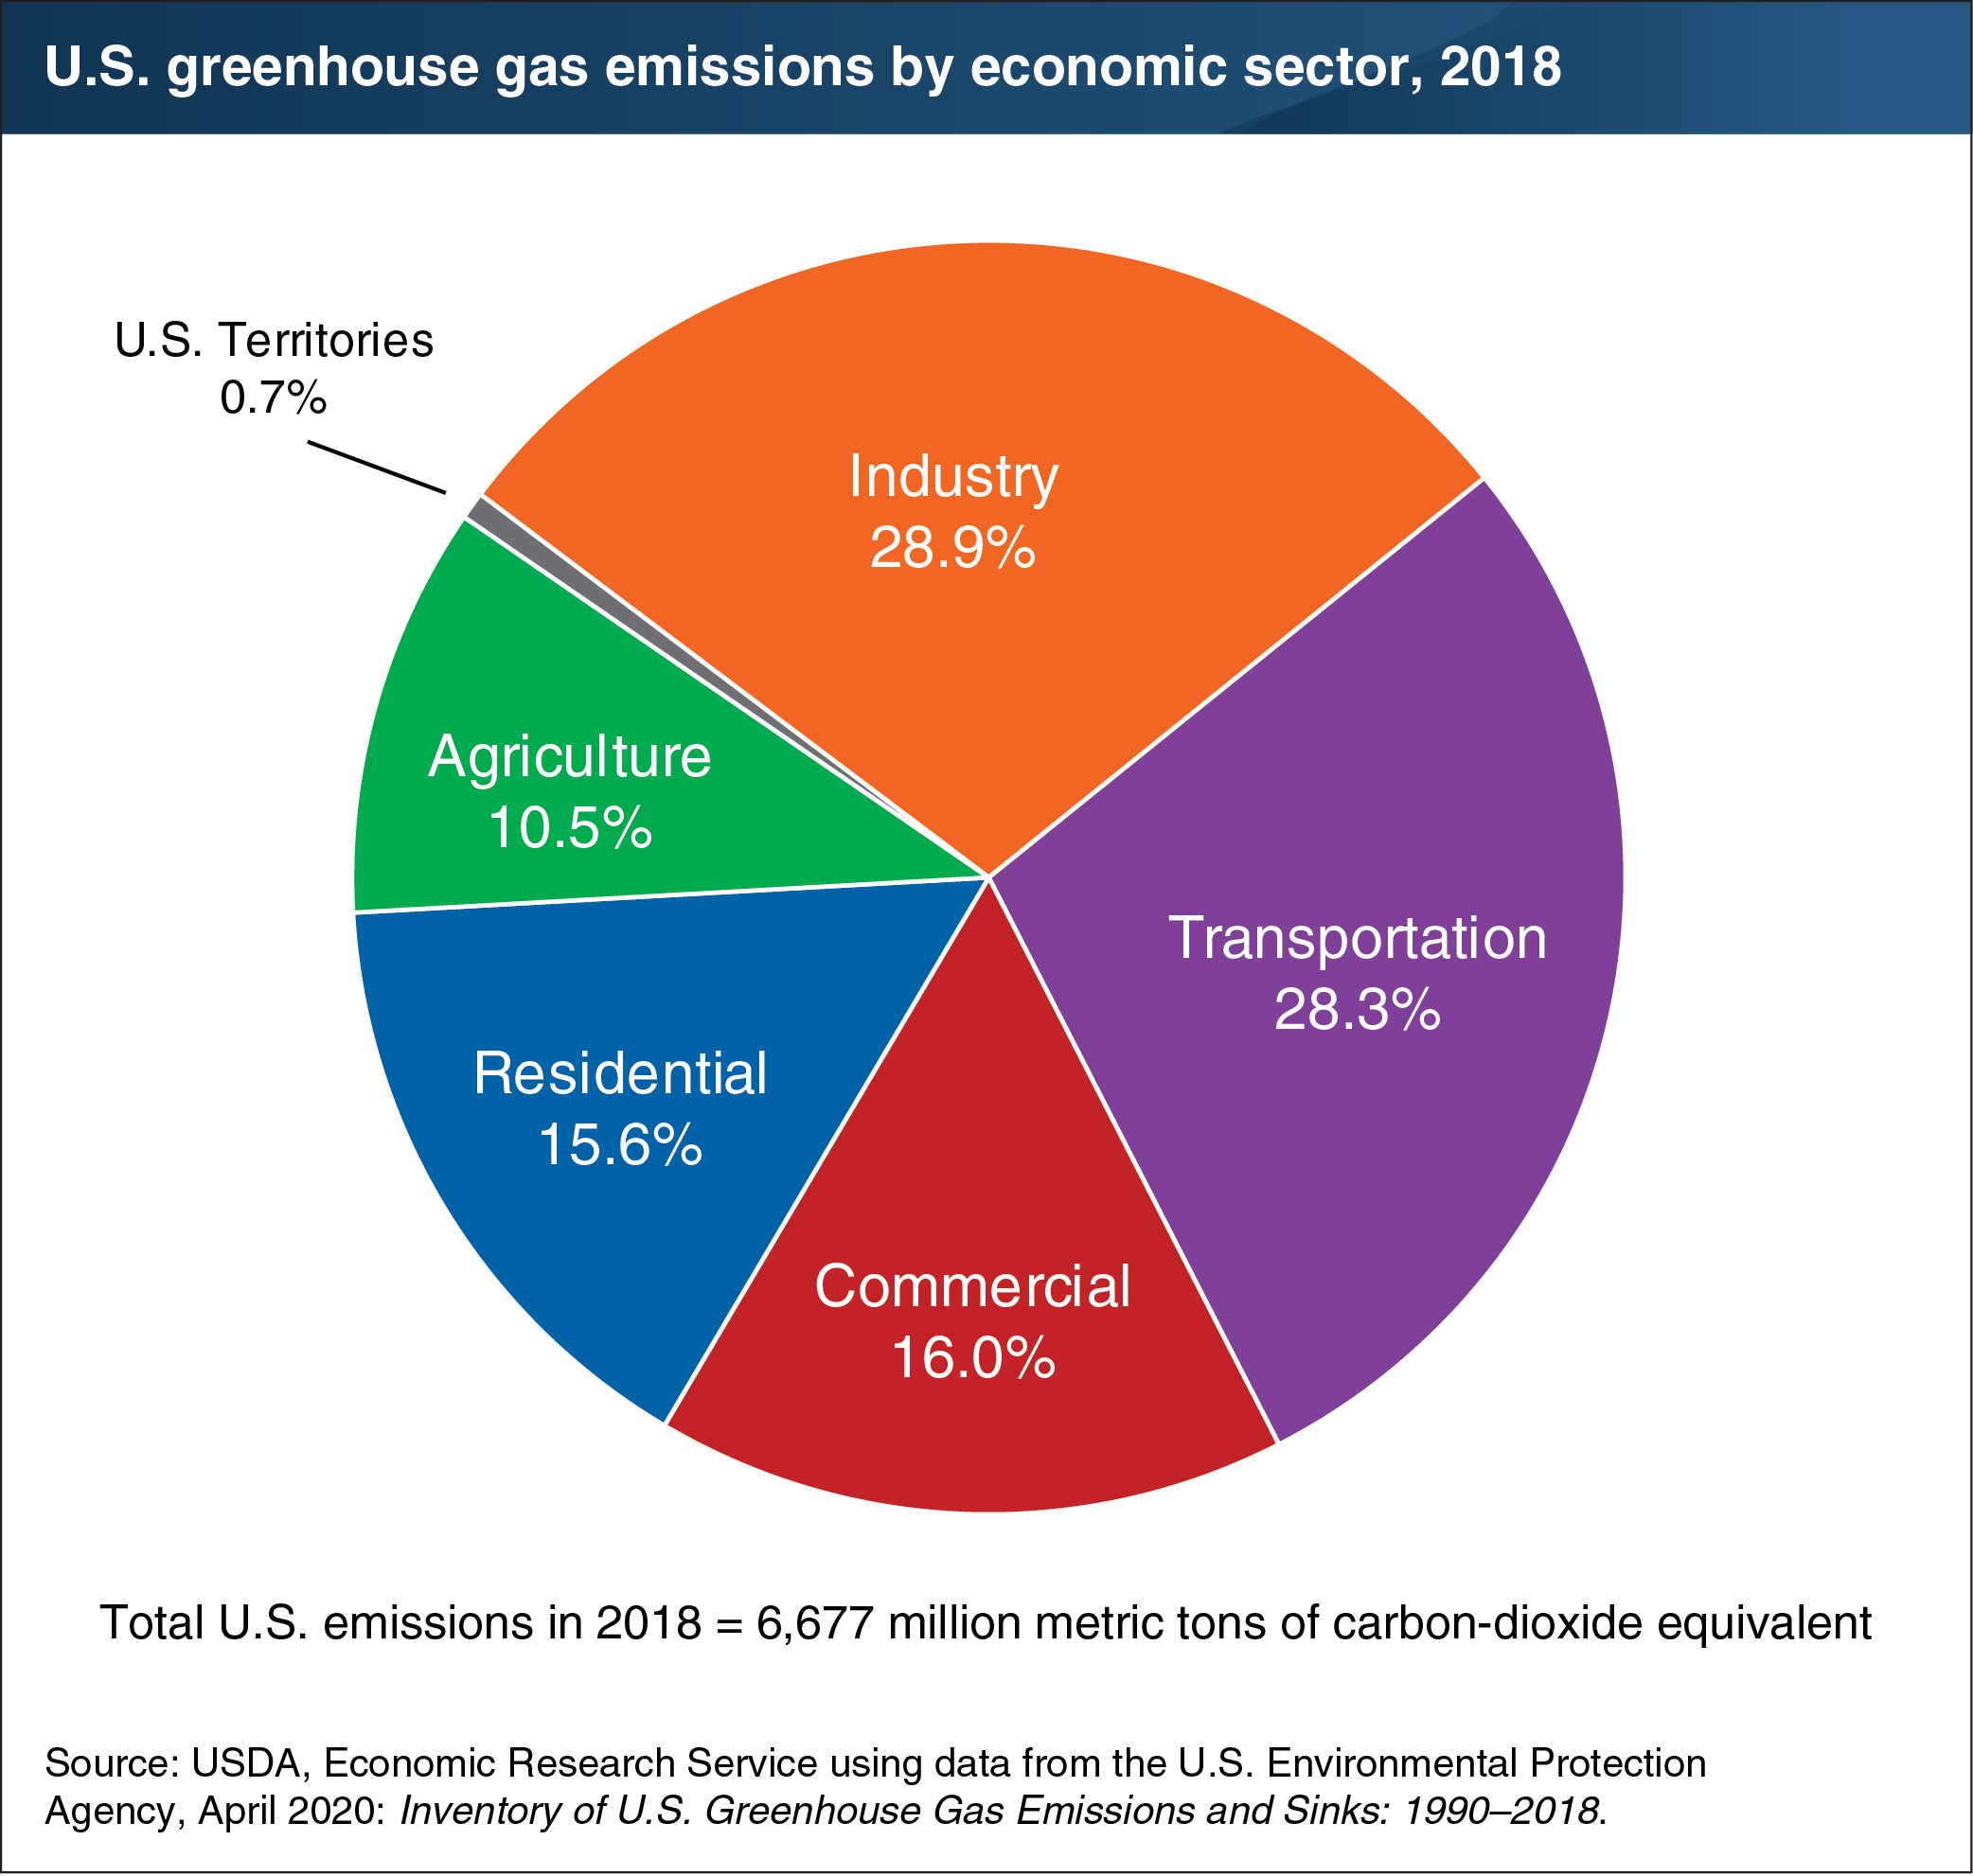 Inventory of U.S. Greenhouse Gas Emissions and Sinks